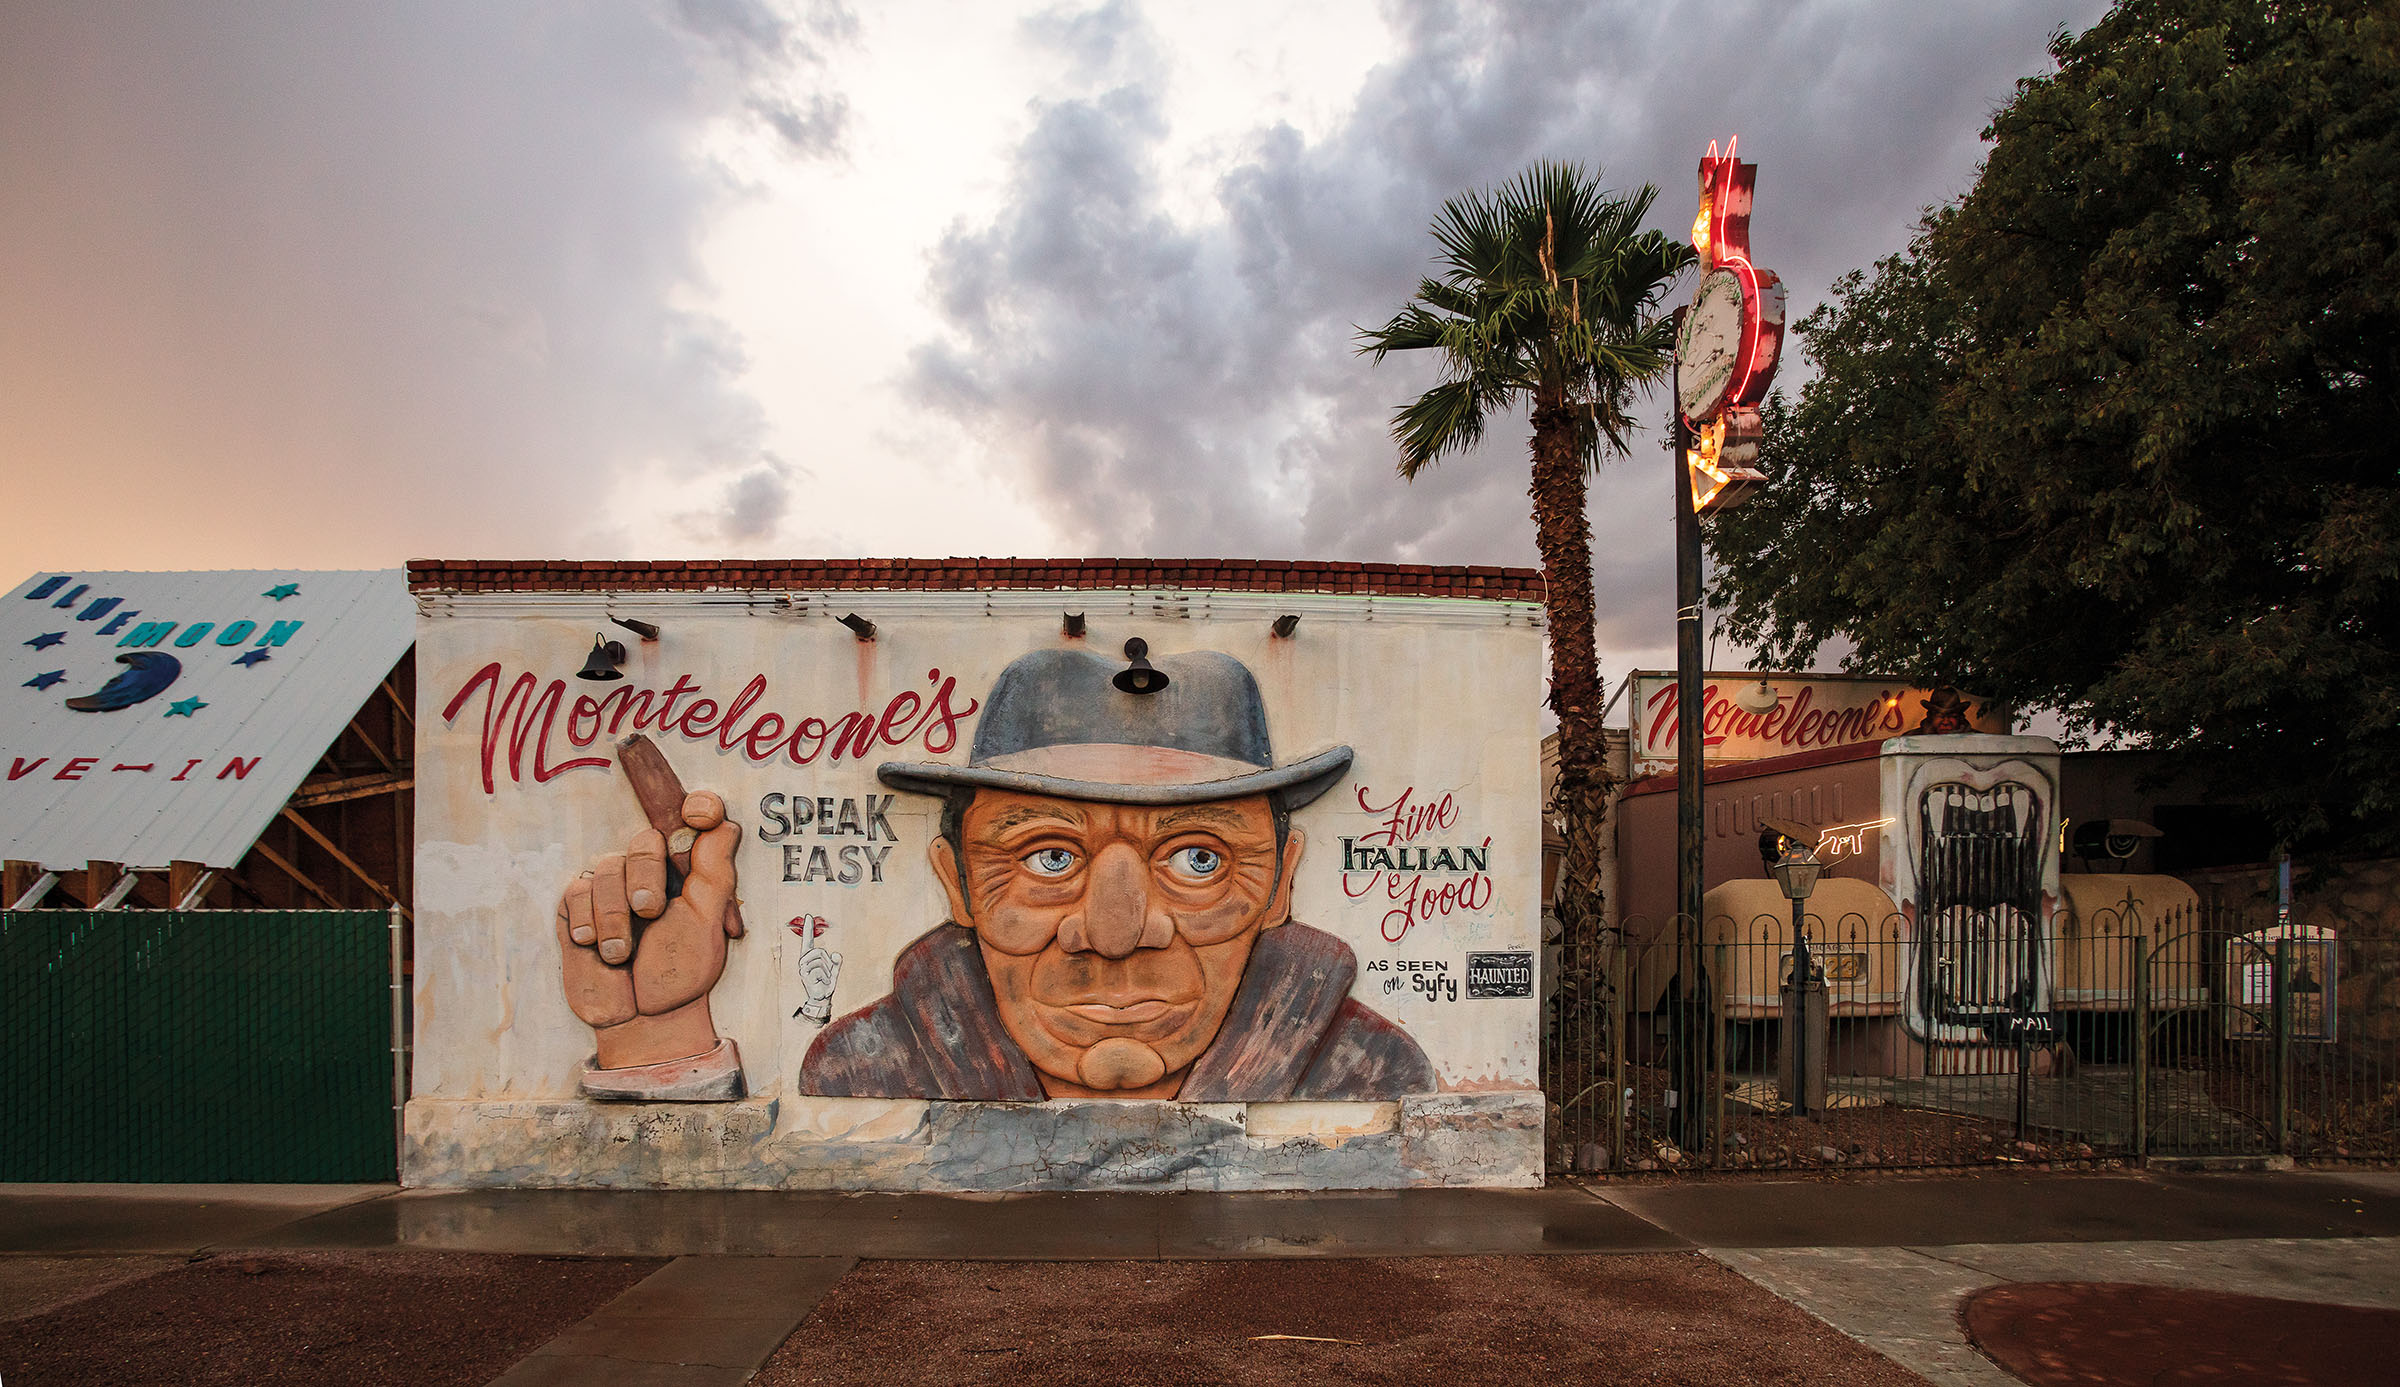 A mural of a man holding a cigar with text reading "Monteleone's Speak Easy" and "Fine Italian food"